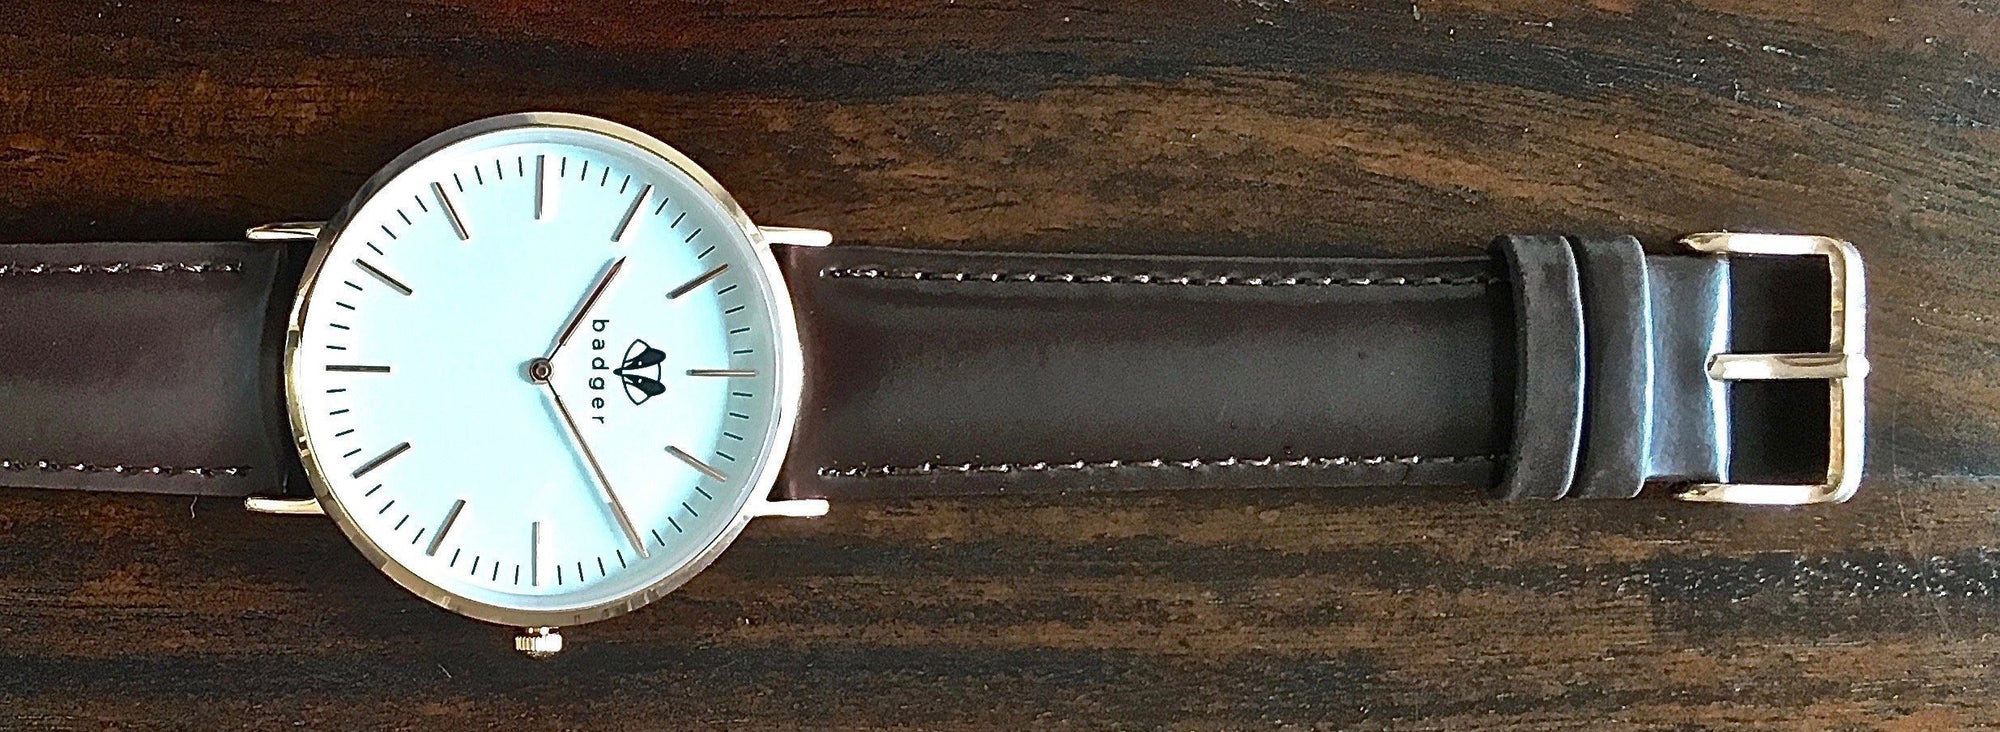 GROOMSMEN WATCHES - THE SWANKY STYLE GUIDE